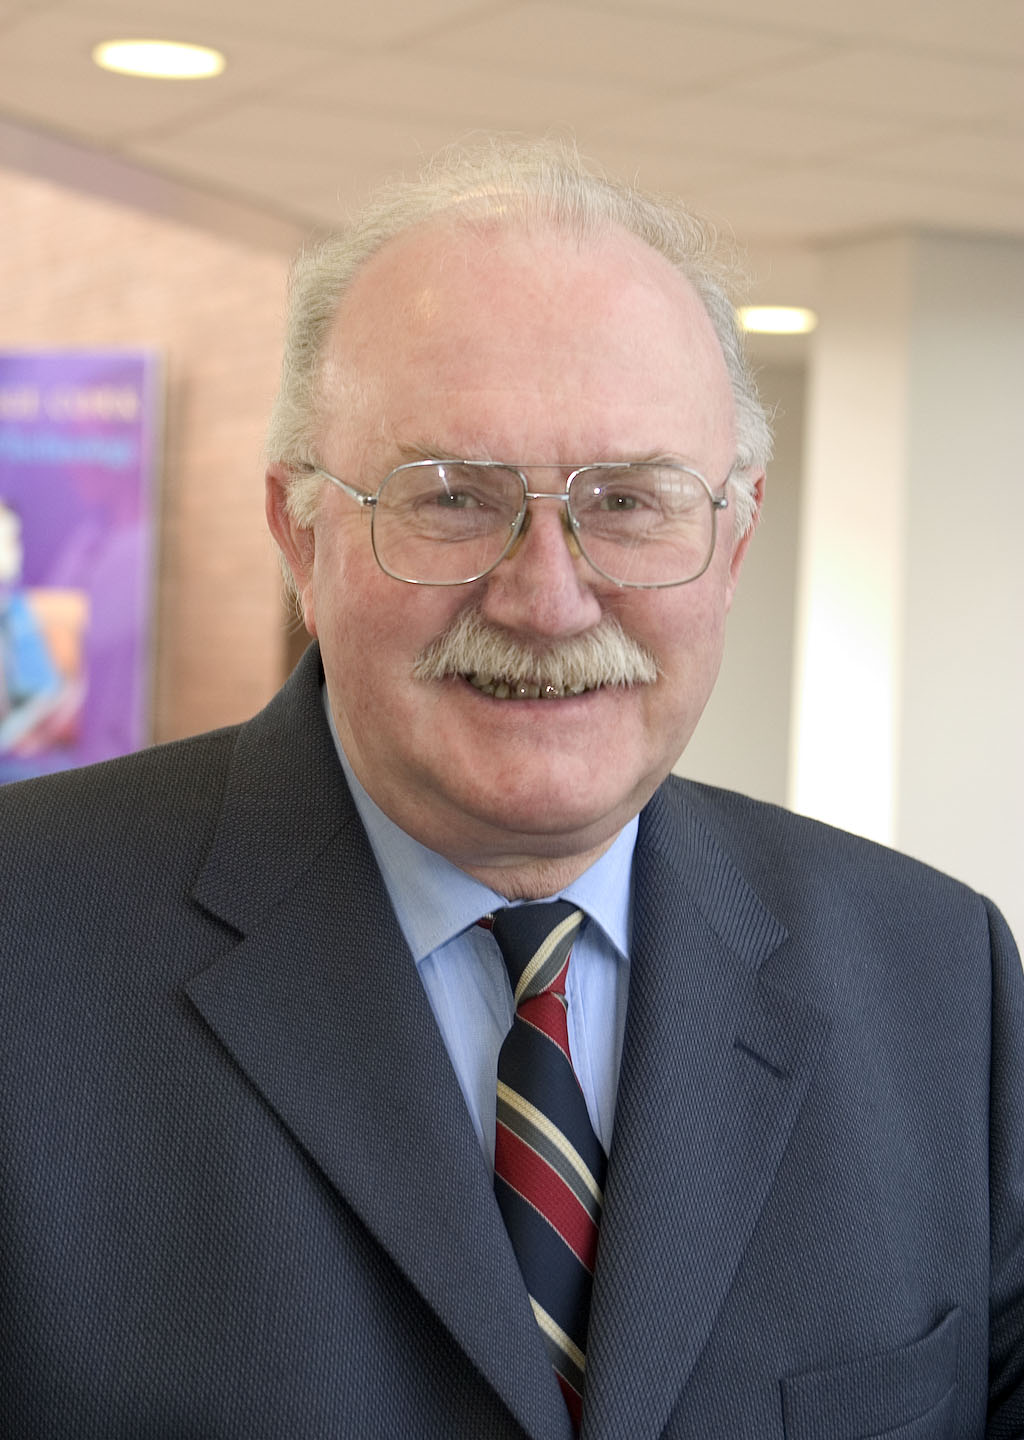 Faculty of Food Science and Technology University College Cork: A History by Prof. Patrick F. Fox